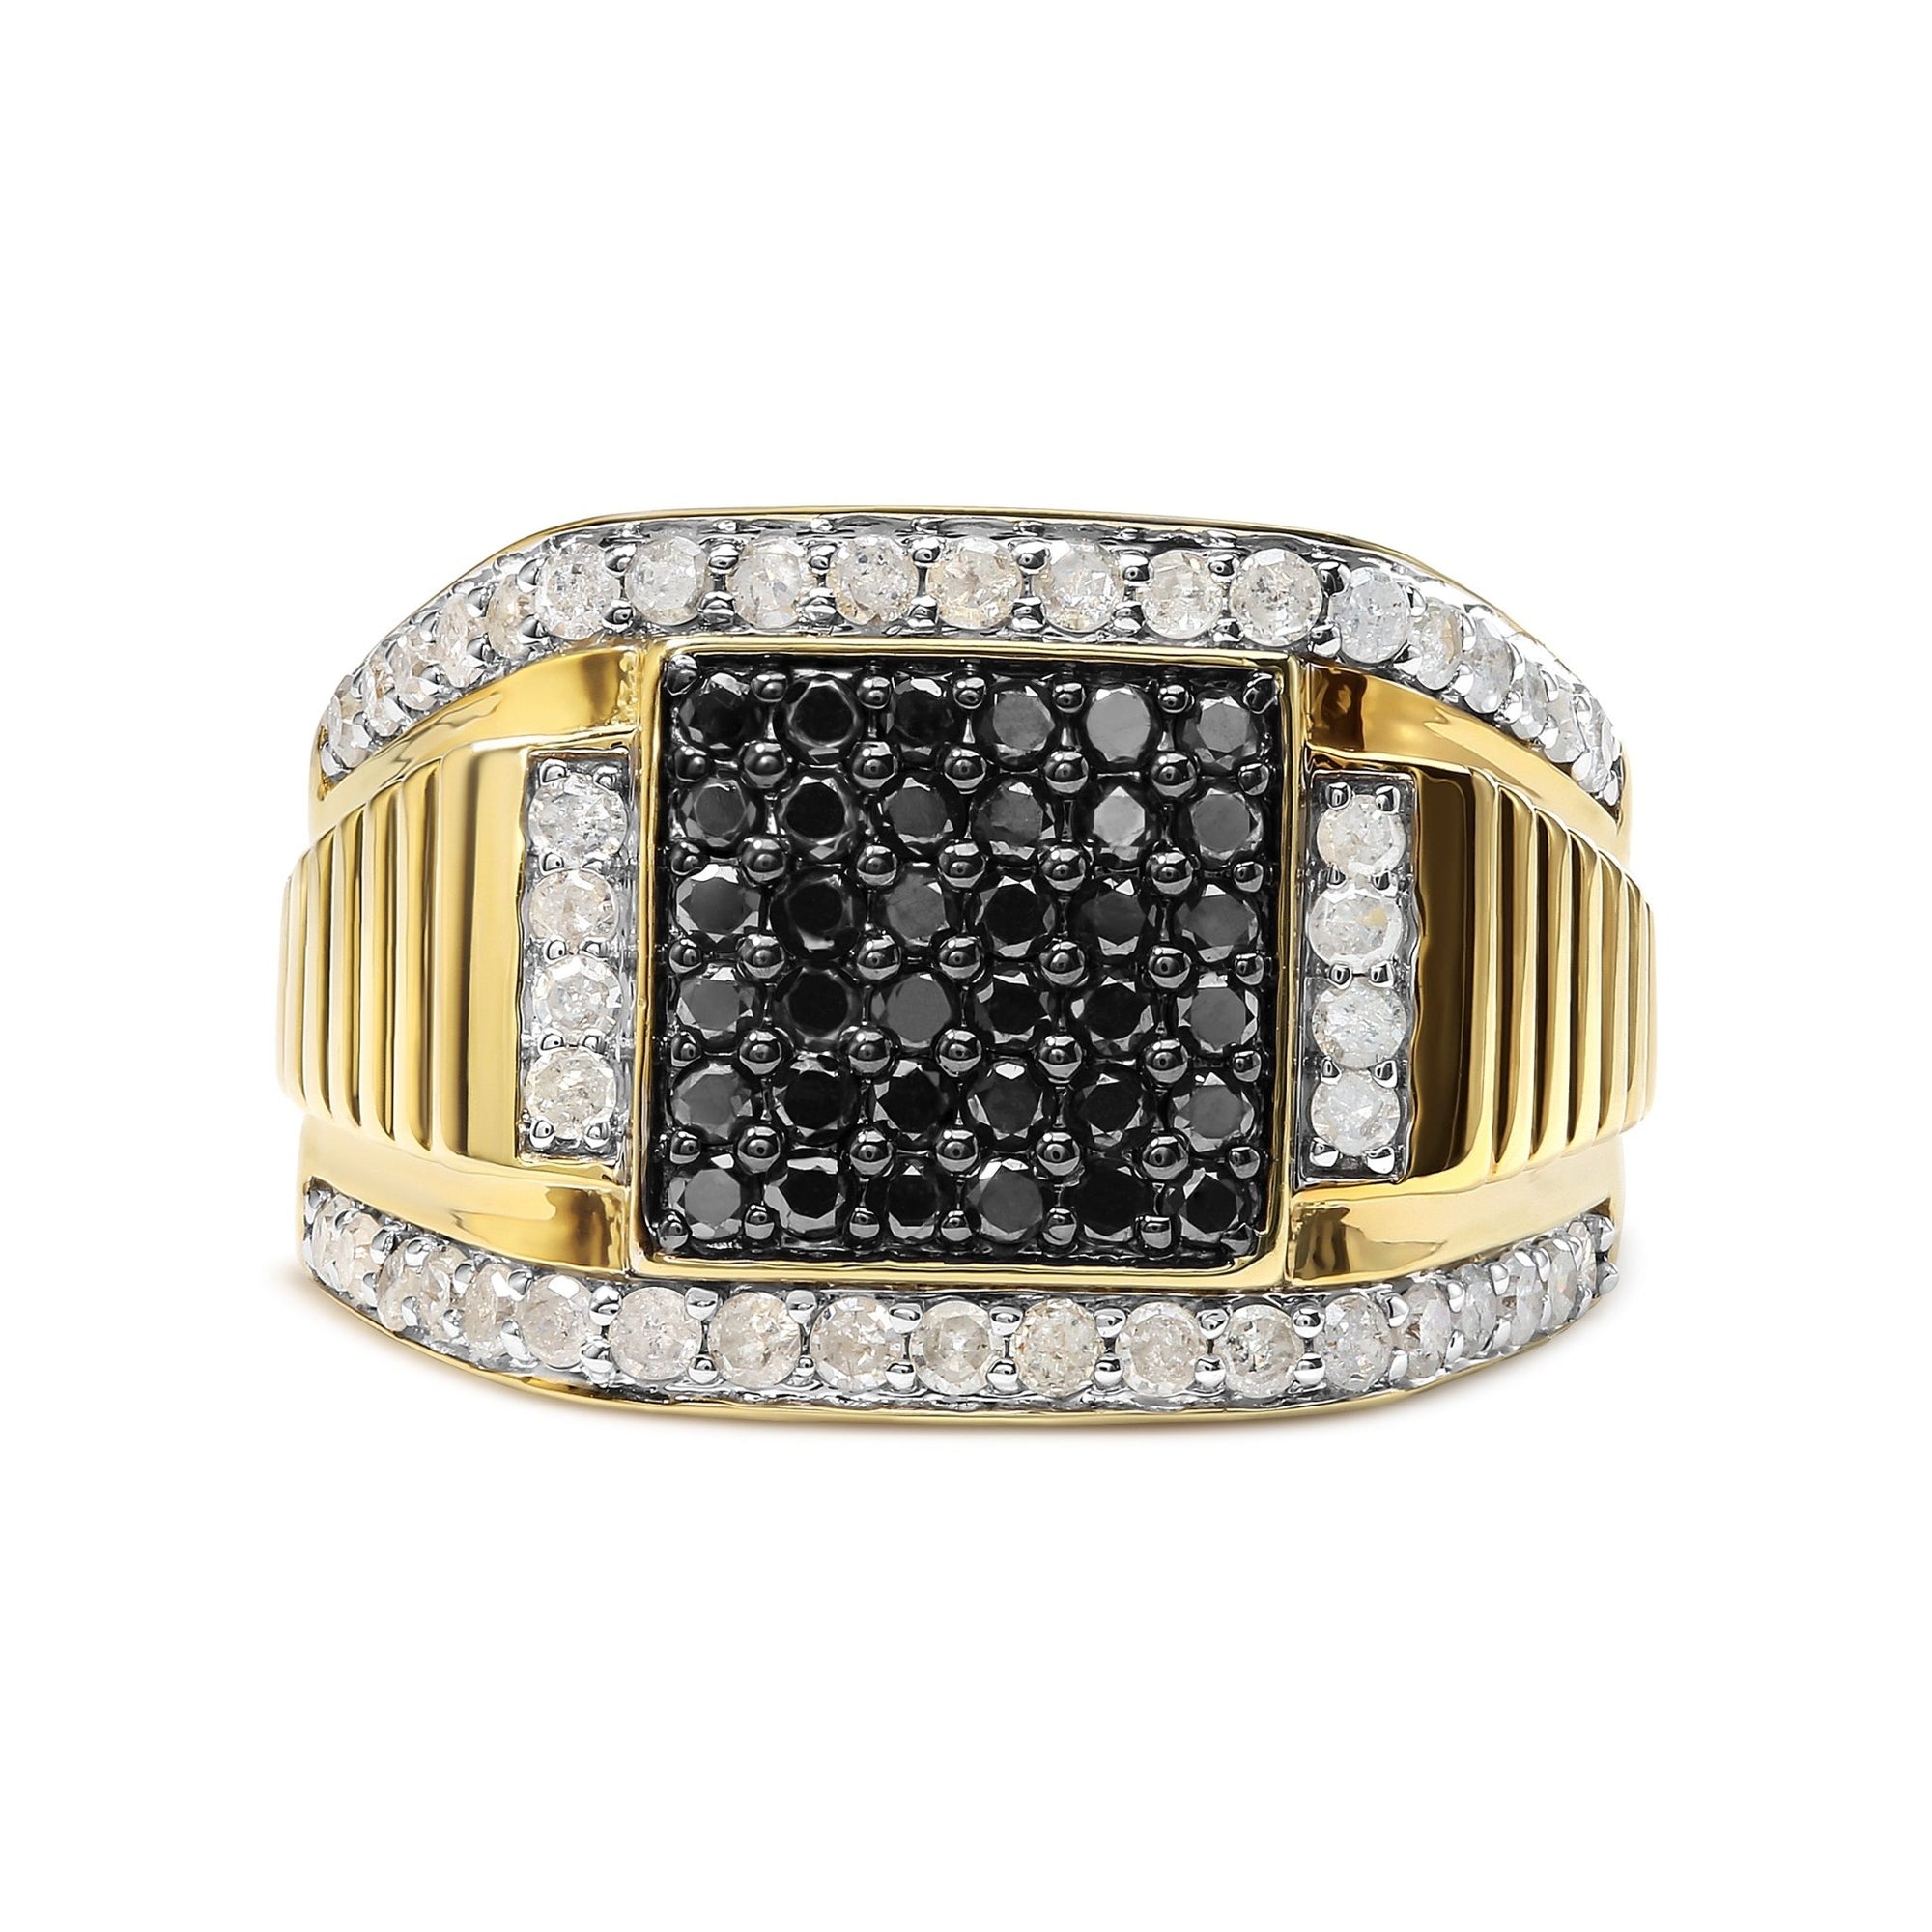 Men's 14K Yellow Gold Plated .925 Sterling Silver 1 1/2 Cttw White and Black Treated Diamond Cluster Ring (Black / I-J Color, I2-I3 Clarity) - Size 10 - LinkagejewelrydesignLinkagejewelrydesign